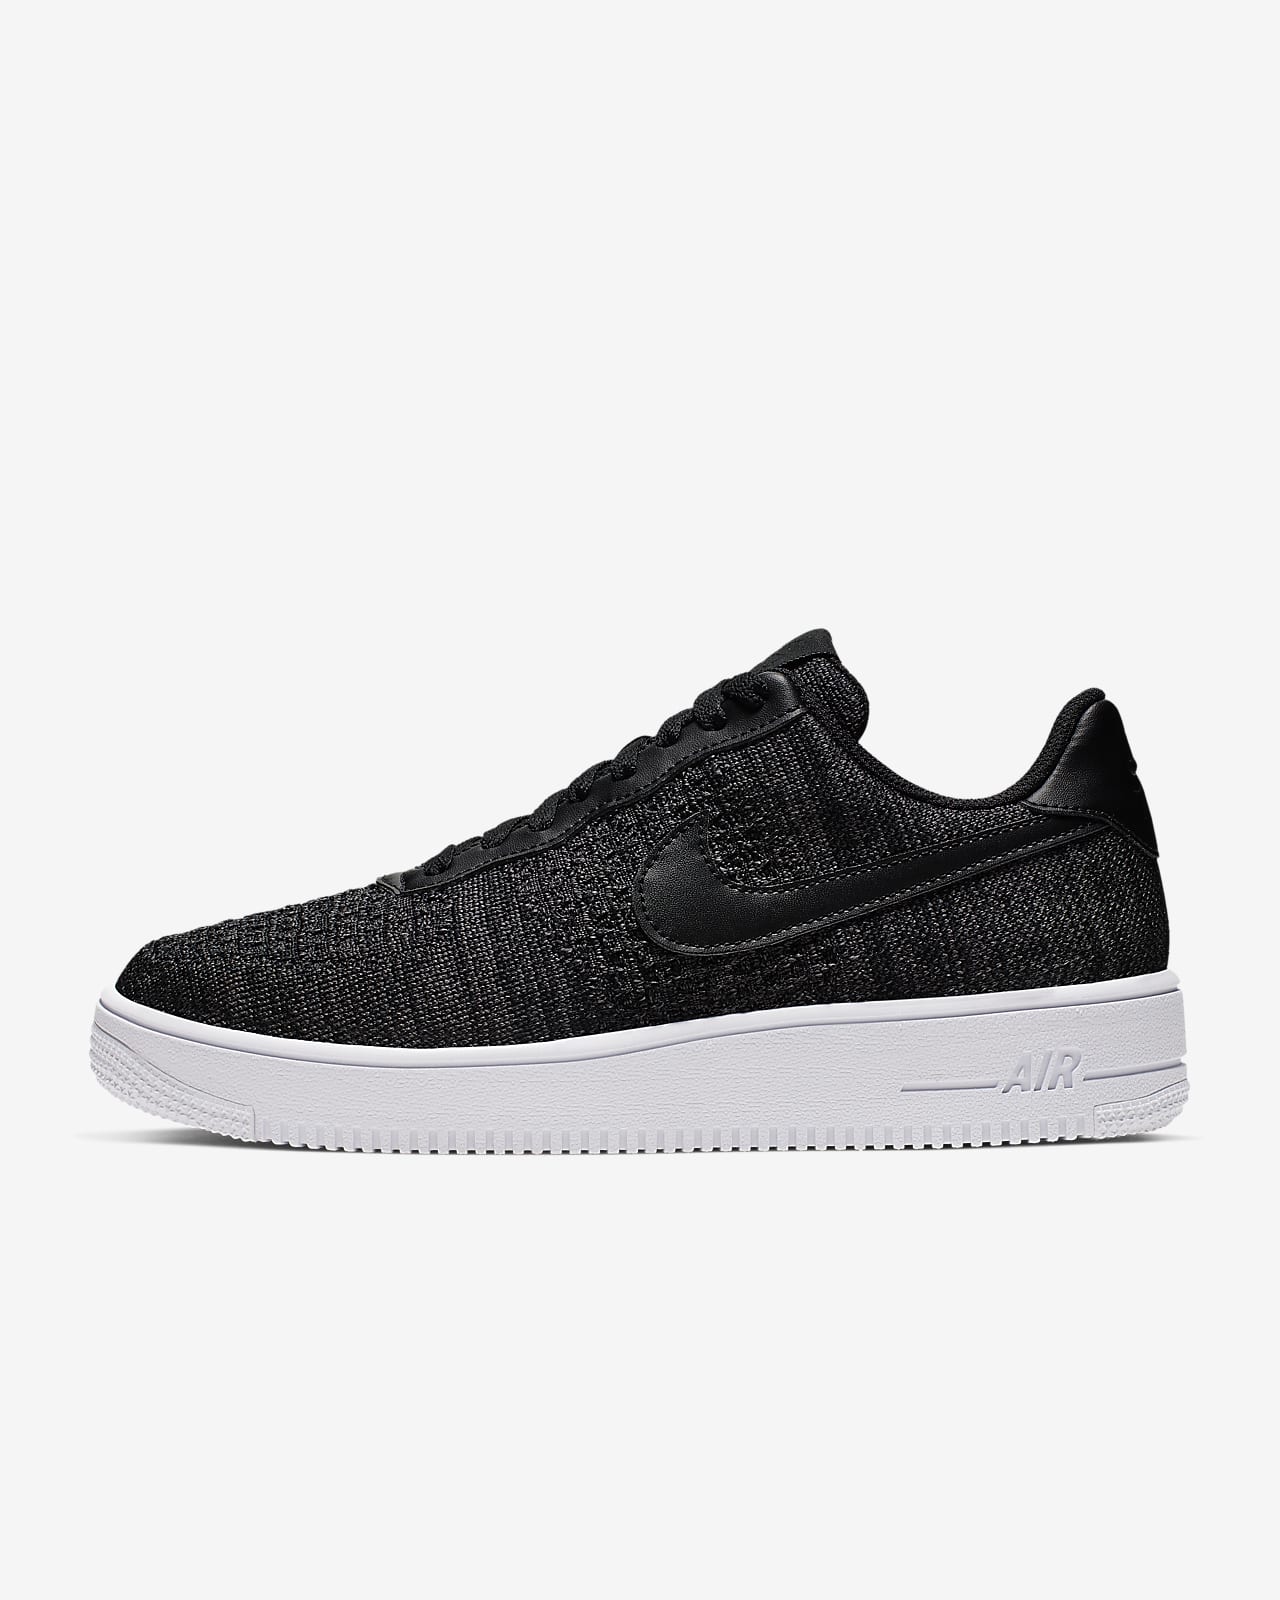 nike force one blancas con negro